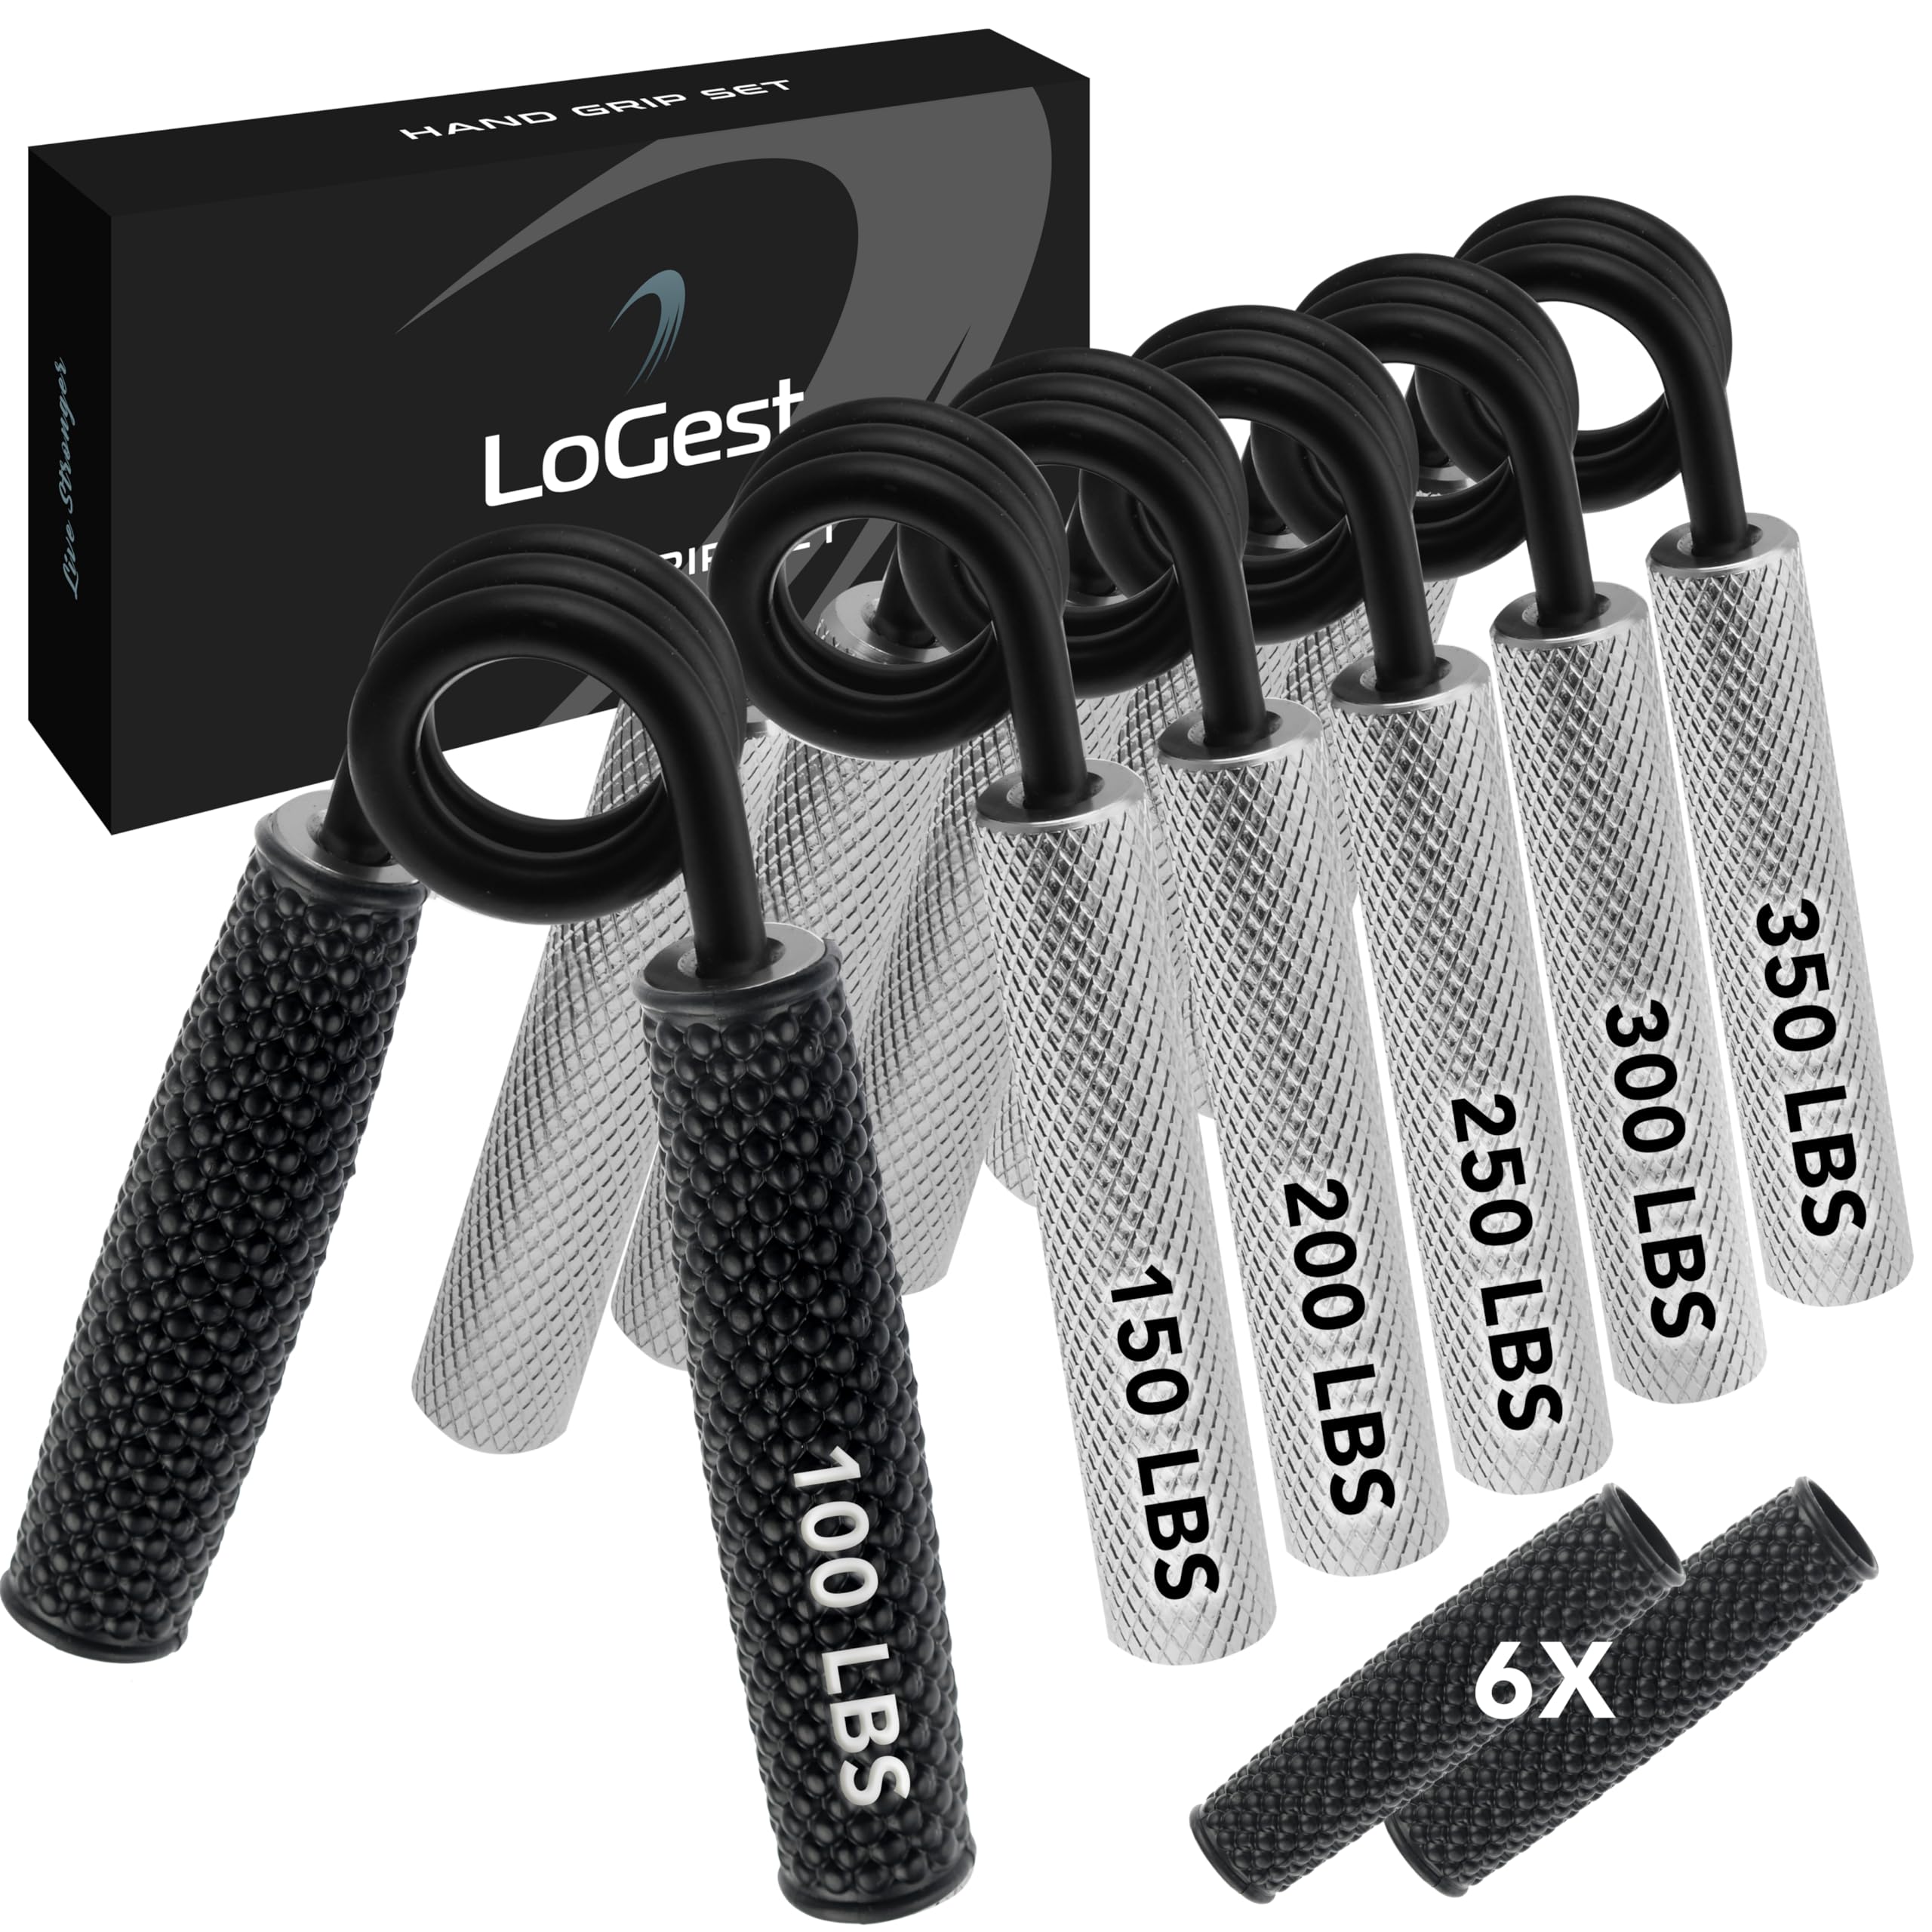 Logest Metal Hand Grip Set, 100LB-350LB 6 Pack 50LB-350LB 7 Pack No Slip Heavy-Duty Grip Strengthener with Gift Box, Great Wrist & Forearm Hand Exerciser, Home Gym, Hand Gripper Grip Strength Trainer